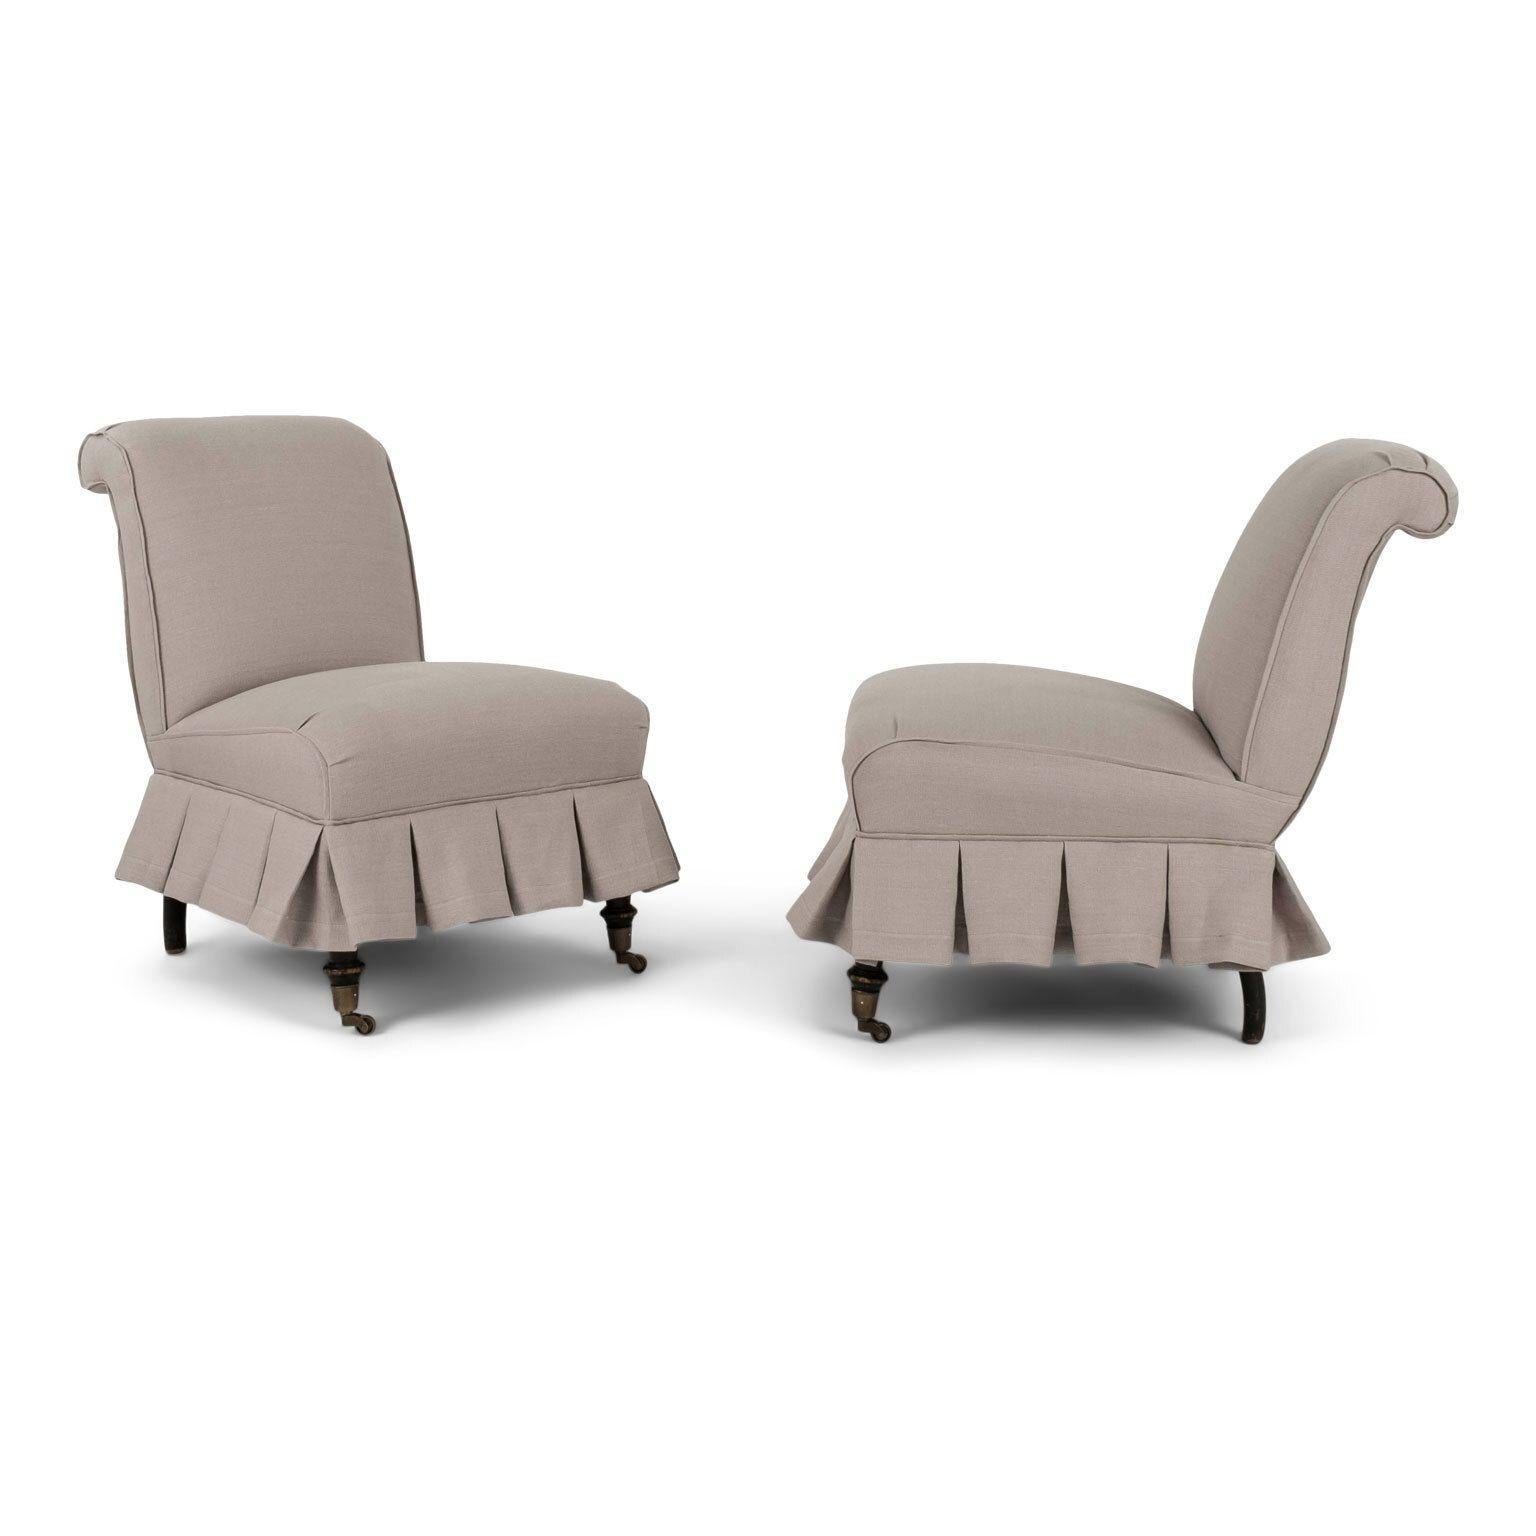 Late 19th Century Pair of French Napoleon III Slipper Chairs in Lavender Linen